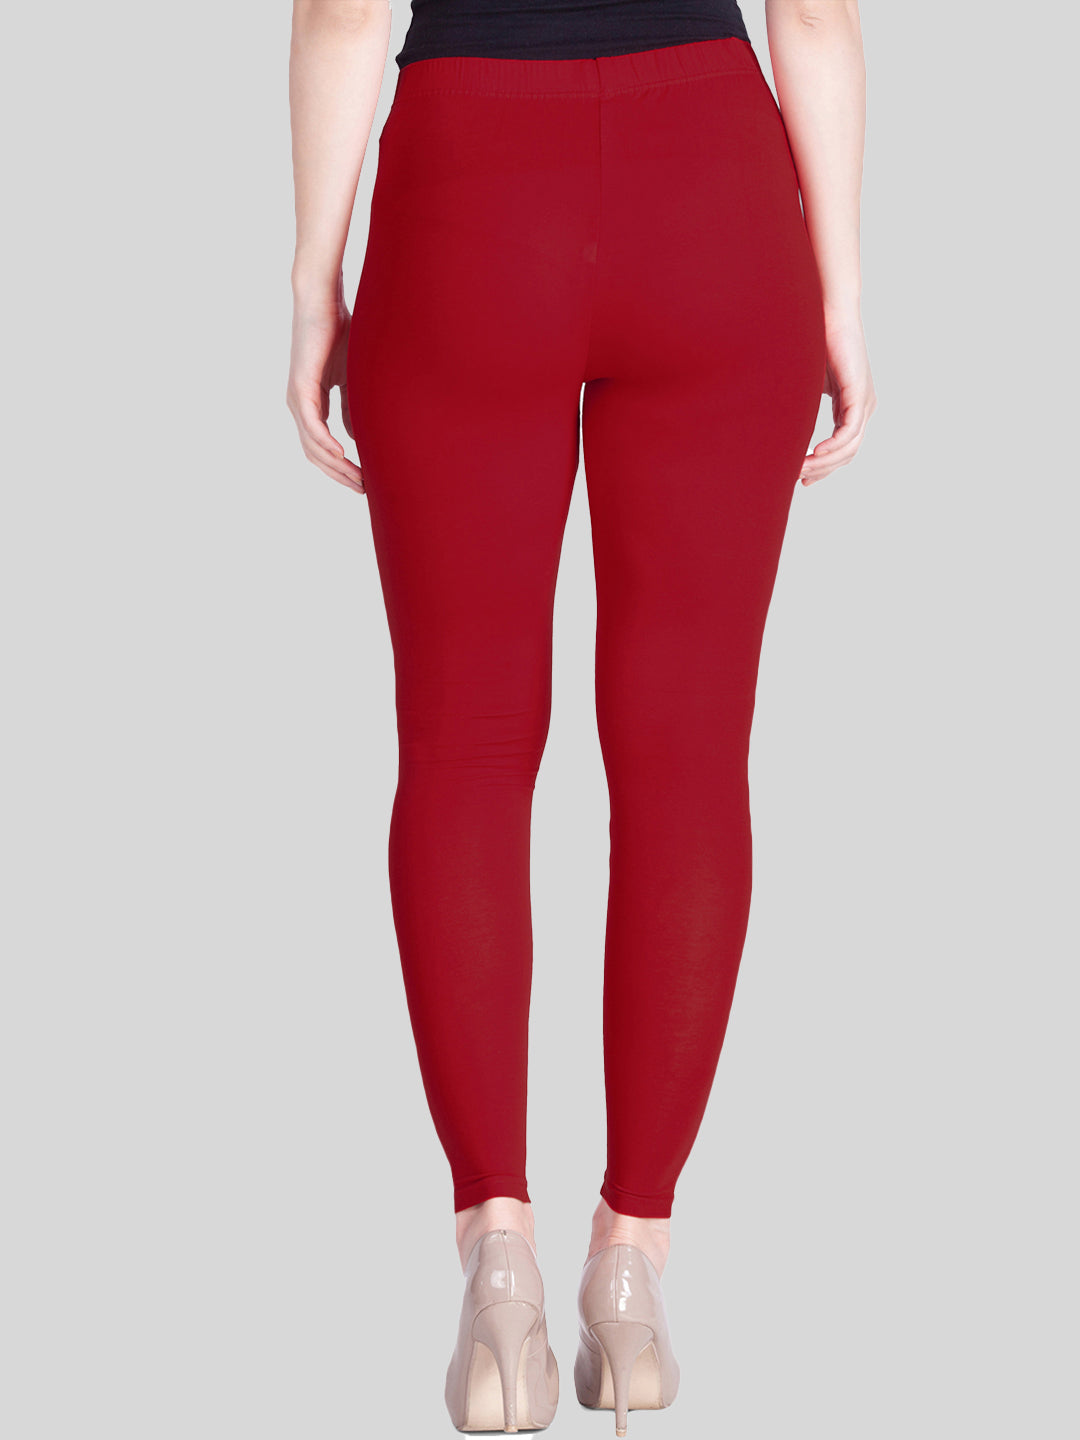 Cotton Straight Fit Lux Lyra Ankle Length Leggings, Size: Free